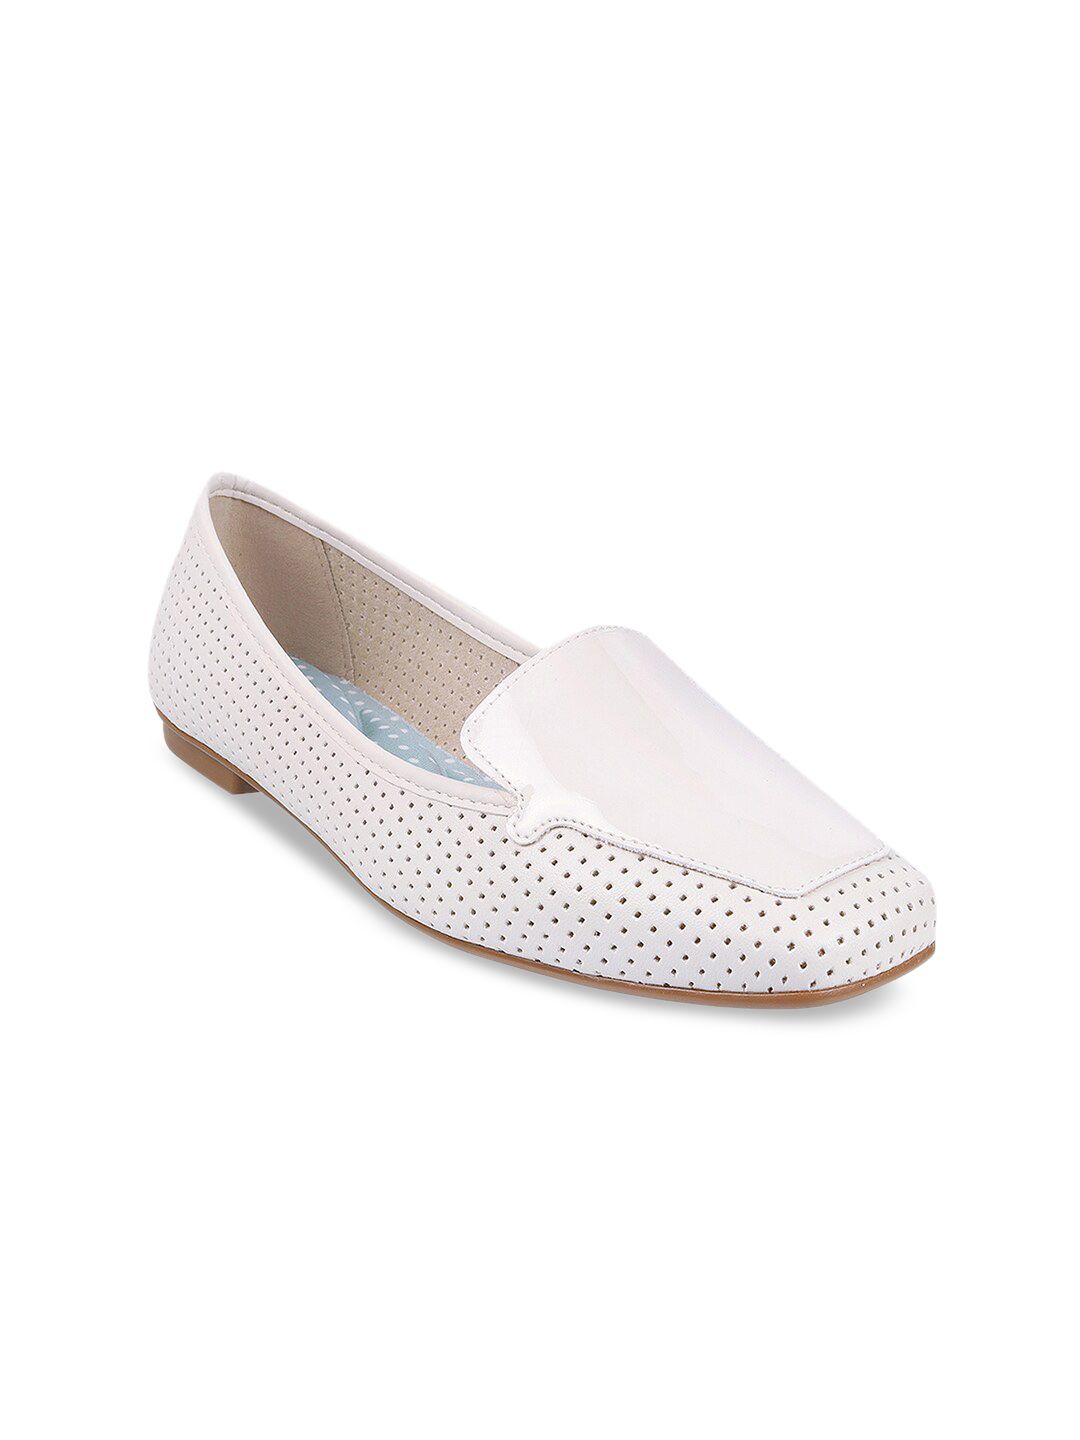 Metro Women White Textured Ballerinas with Laser Cuts Flats Price in India